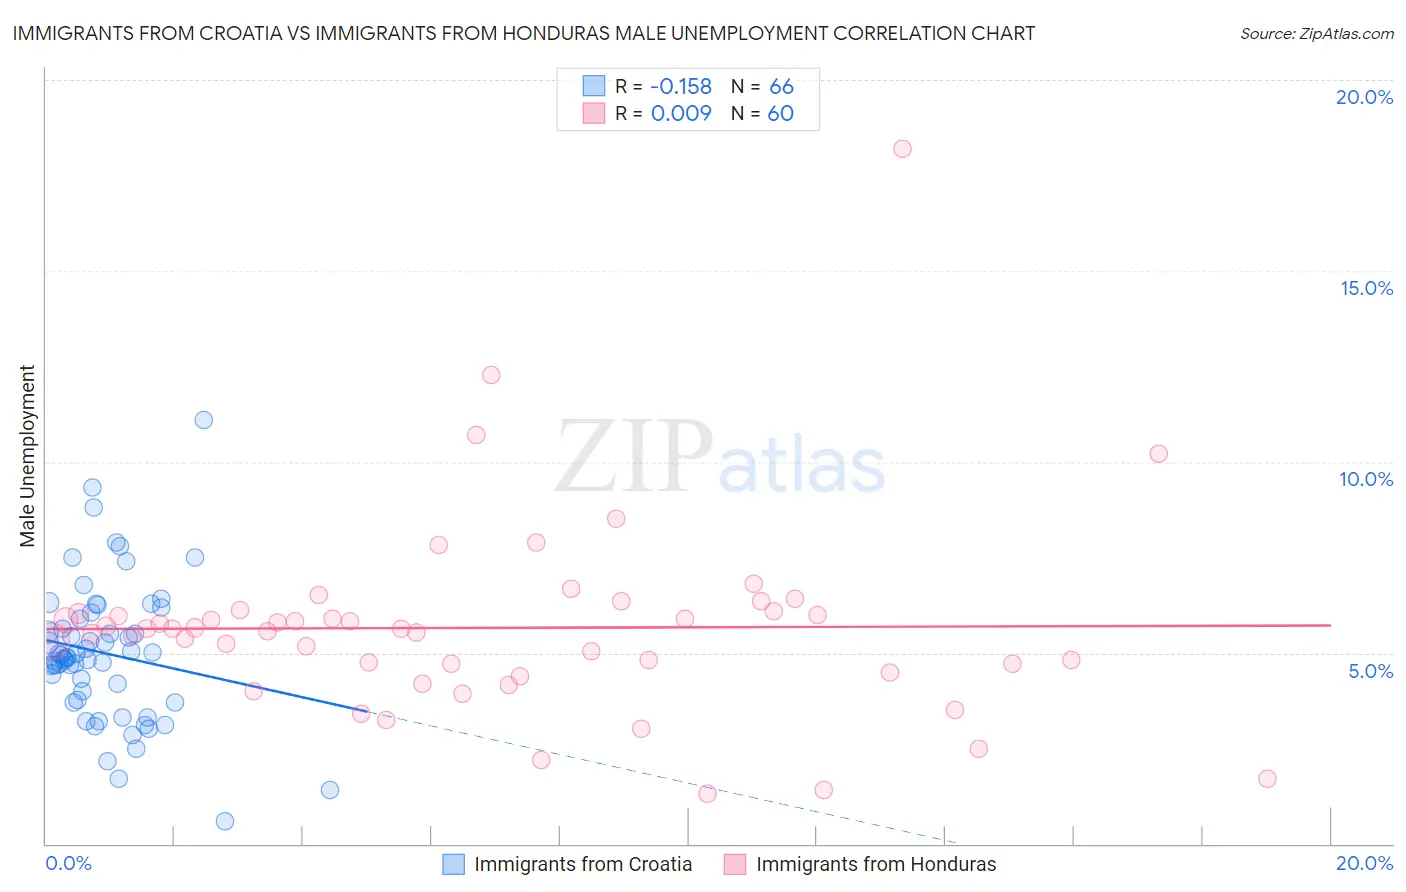 Immigrants from Croatia vs Immigrants from Honduras Male Unemployment